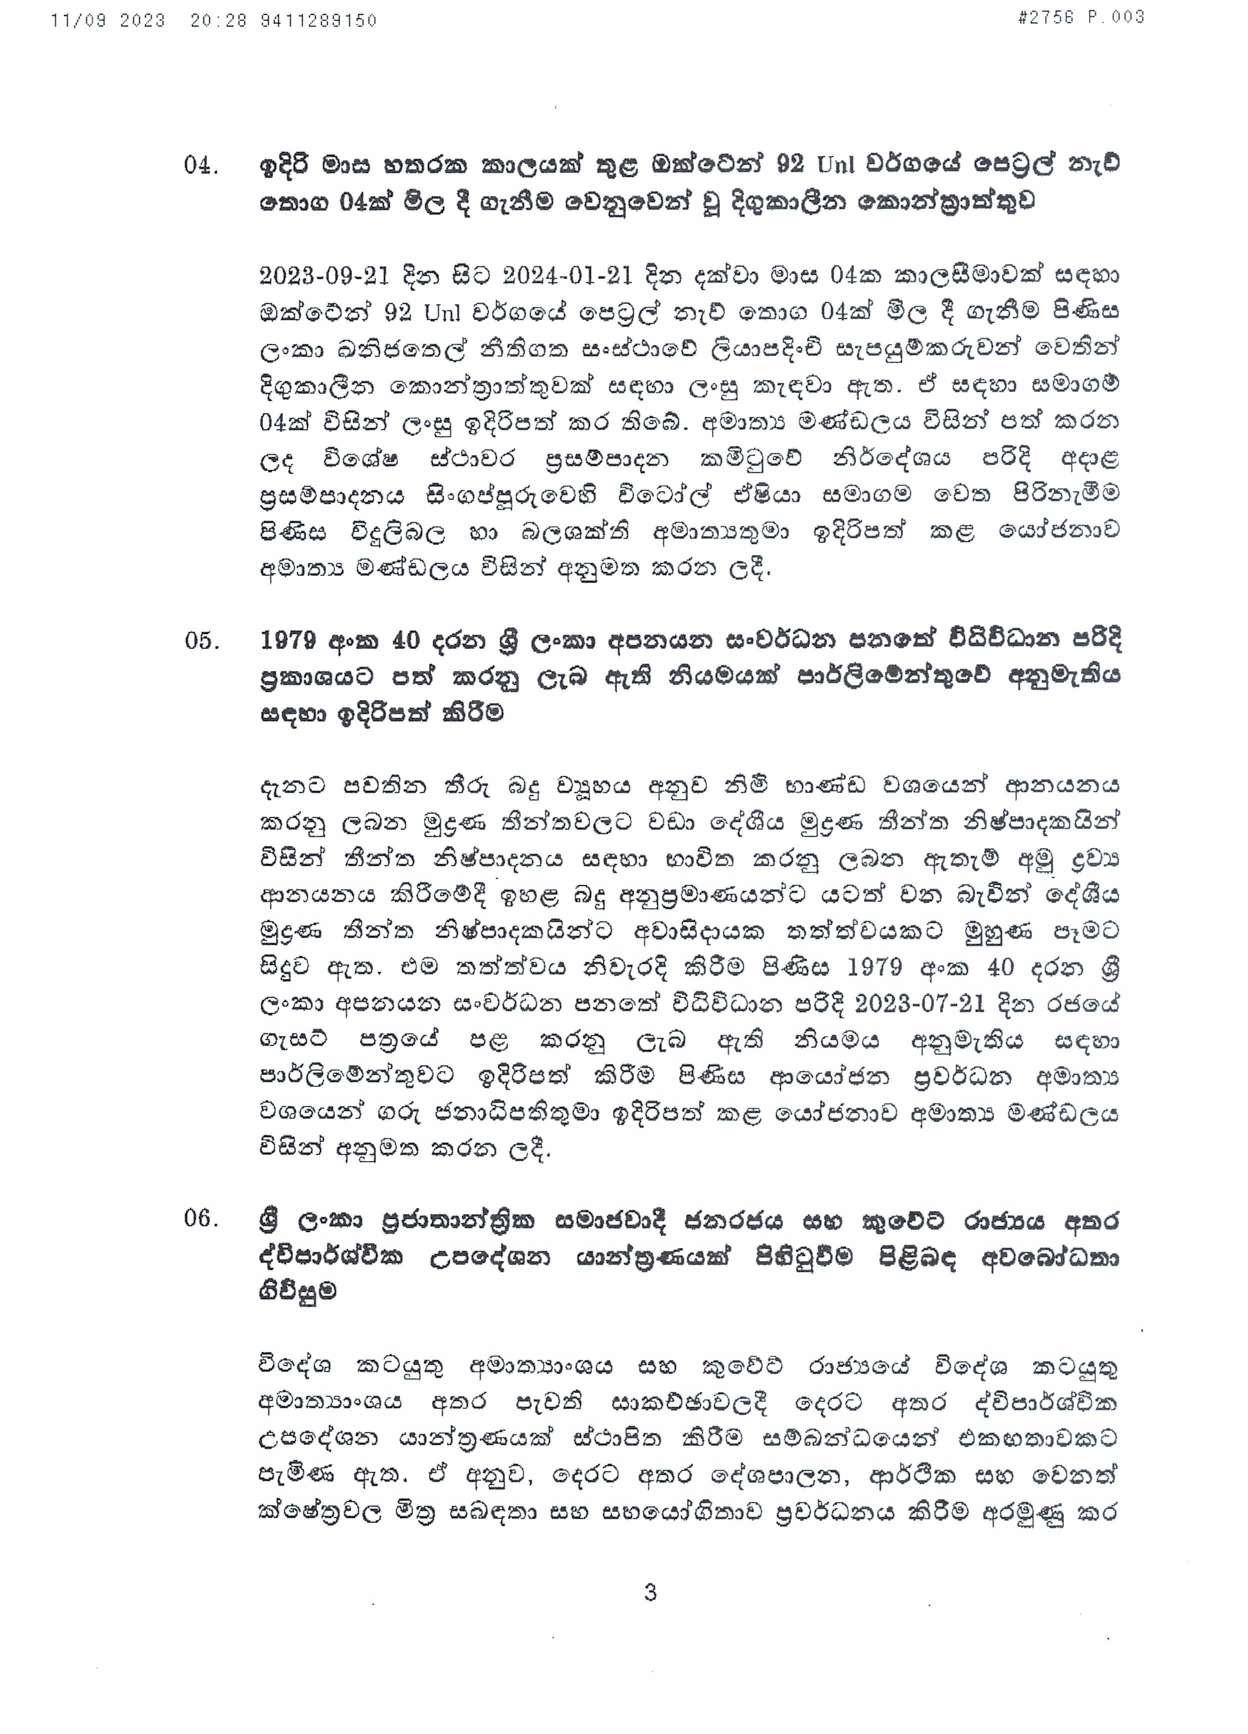 Cabinet Decision on 11.09.2023 page 003